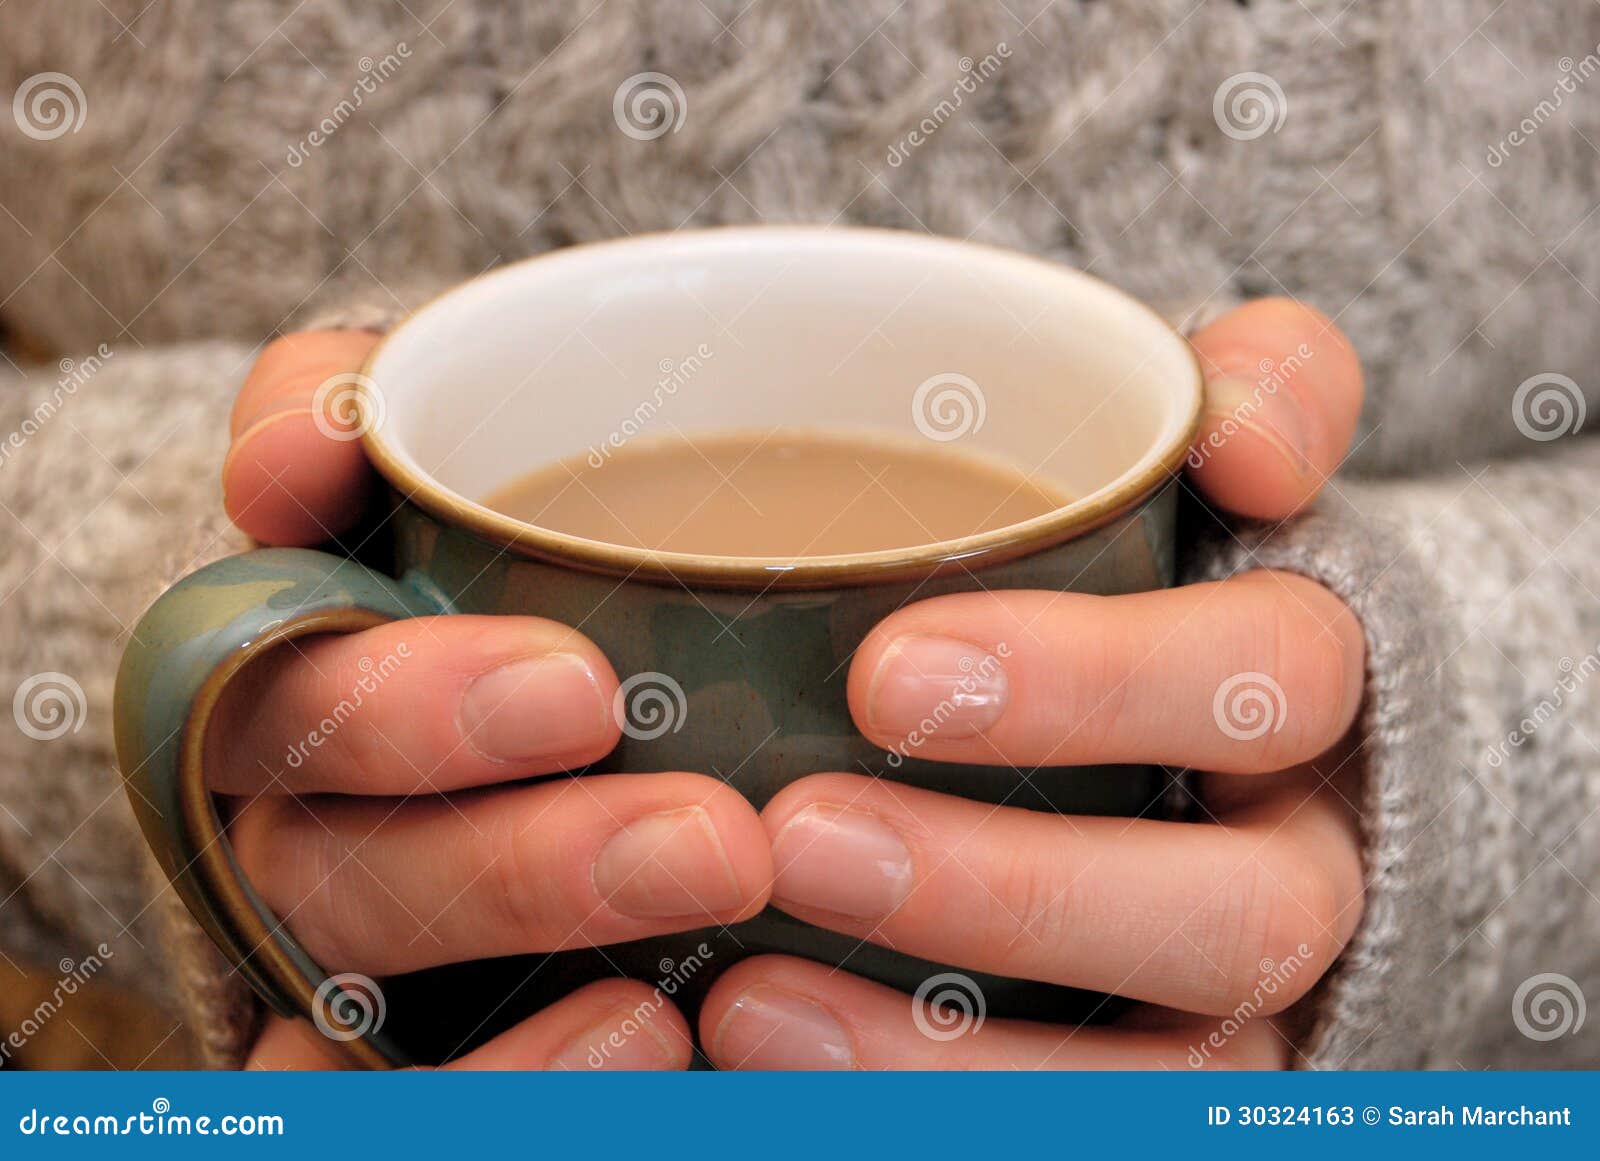 two hands keeping warm, holding a hot cup of tea or coffee